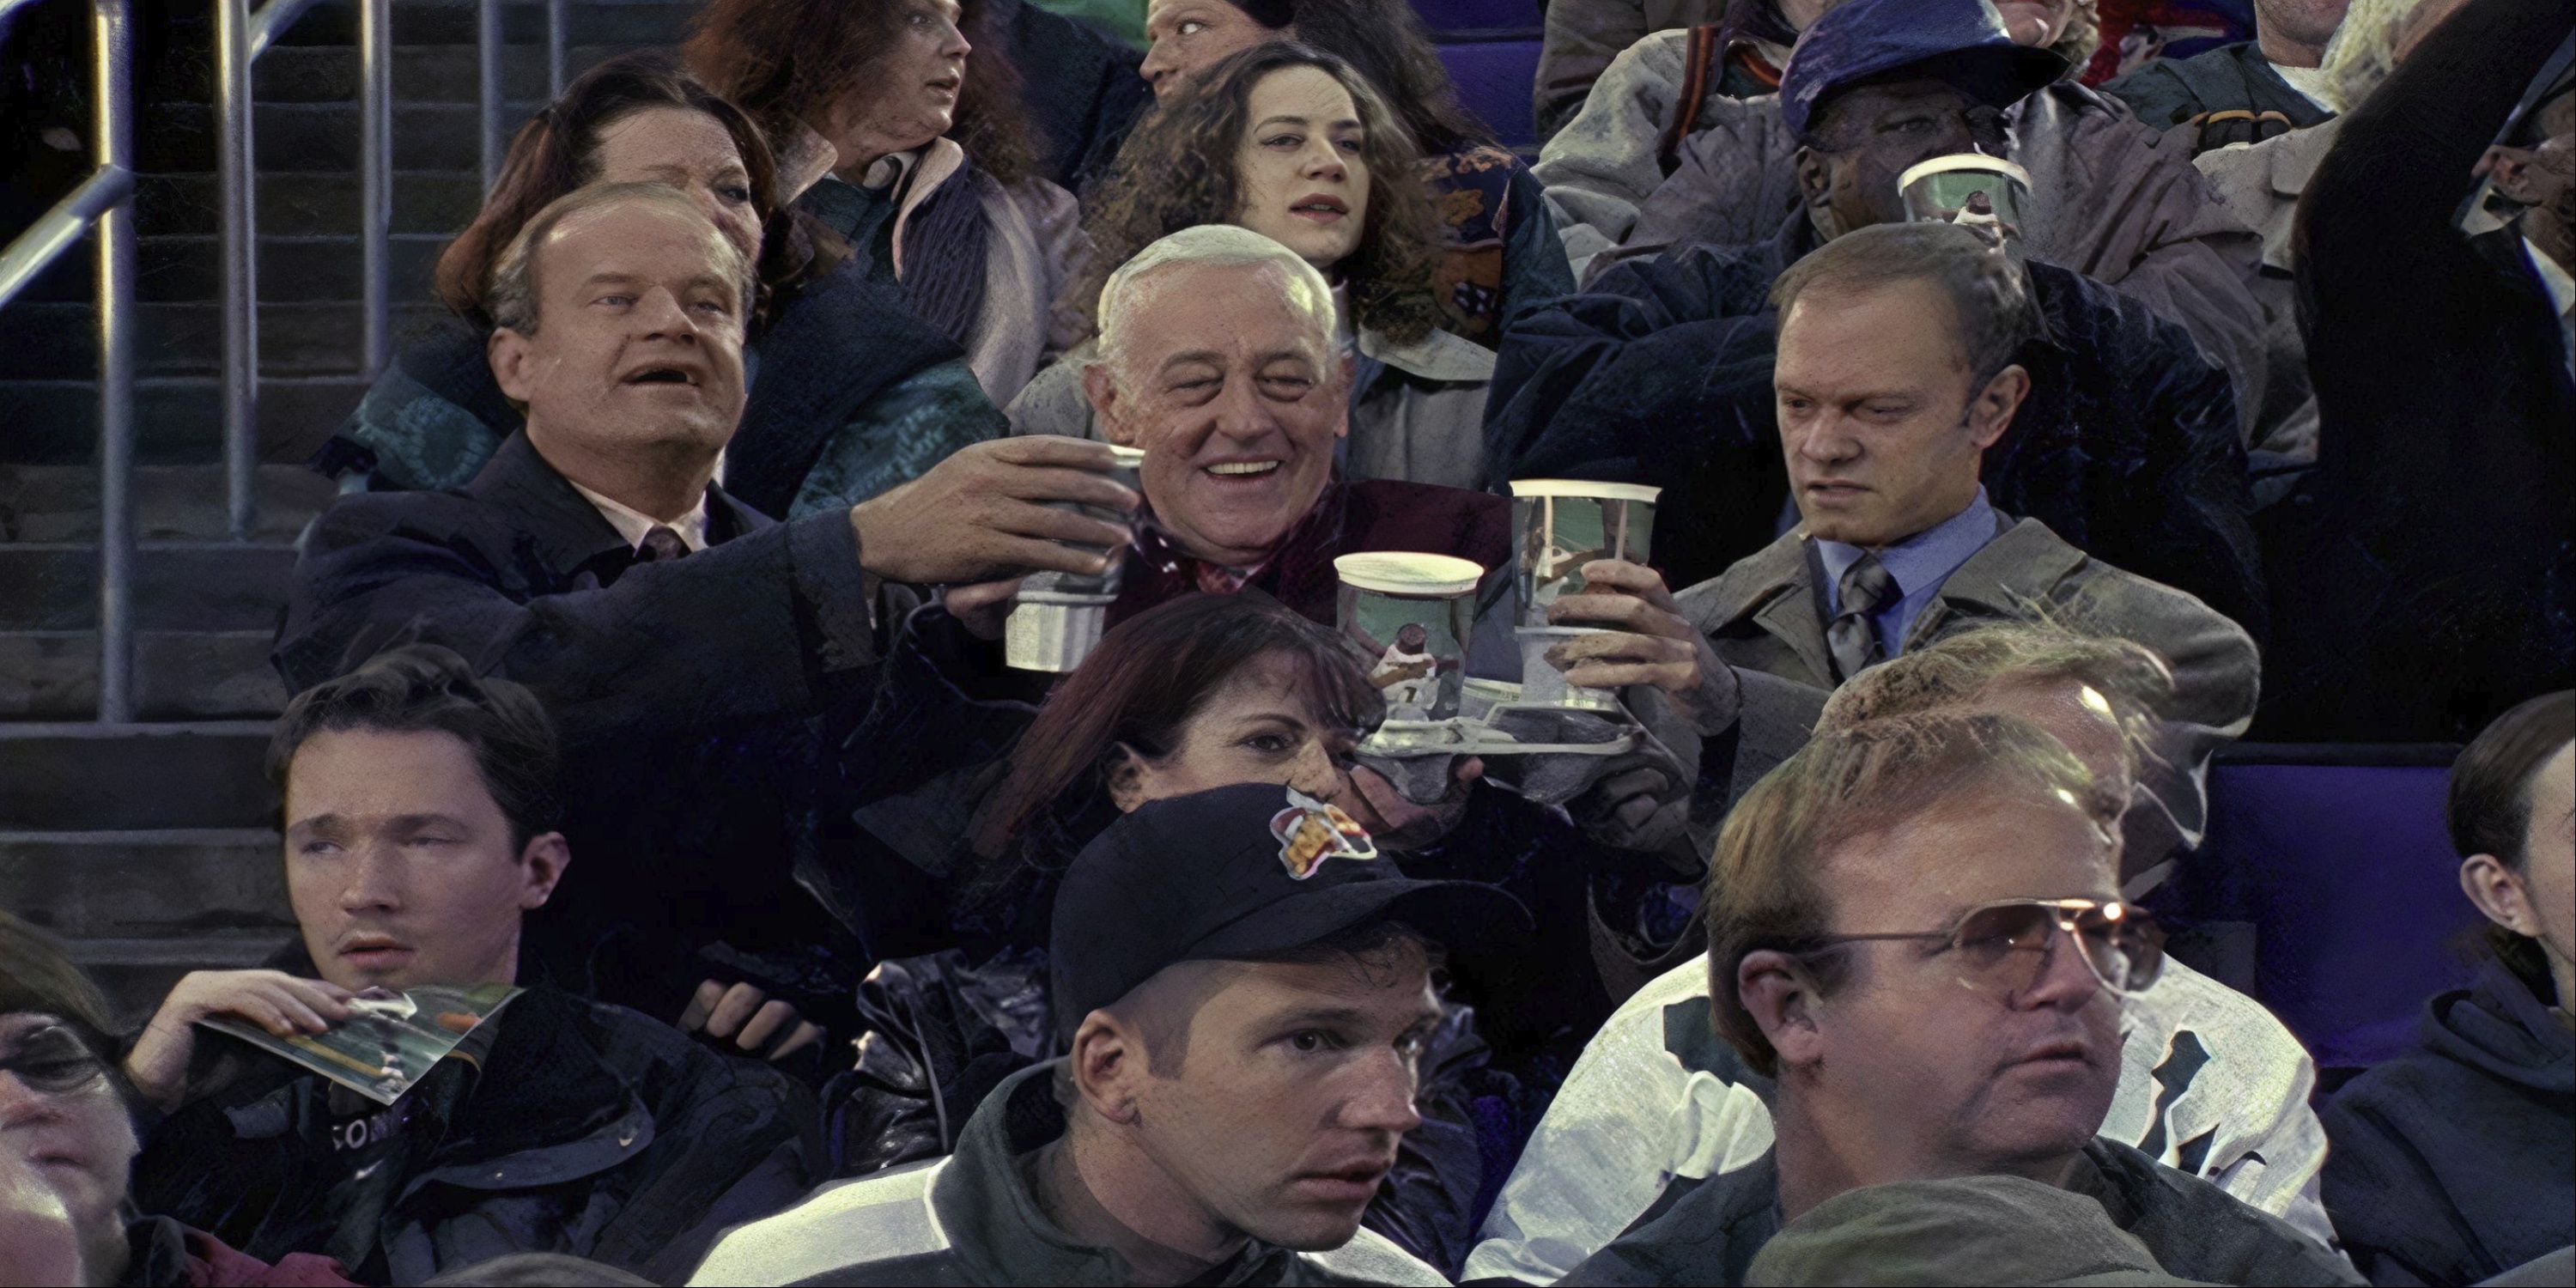 Frasier, Martin and Niles toast at a Sonics game in 'Frasier'